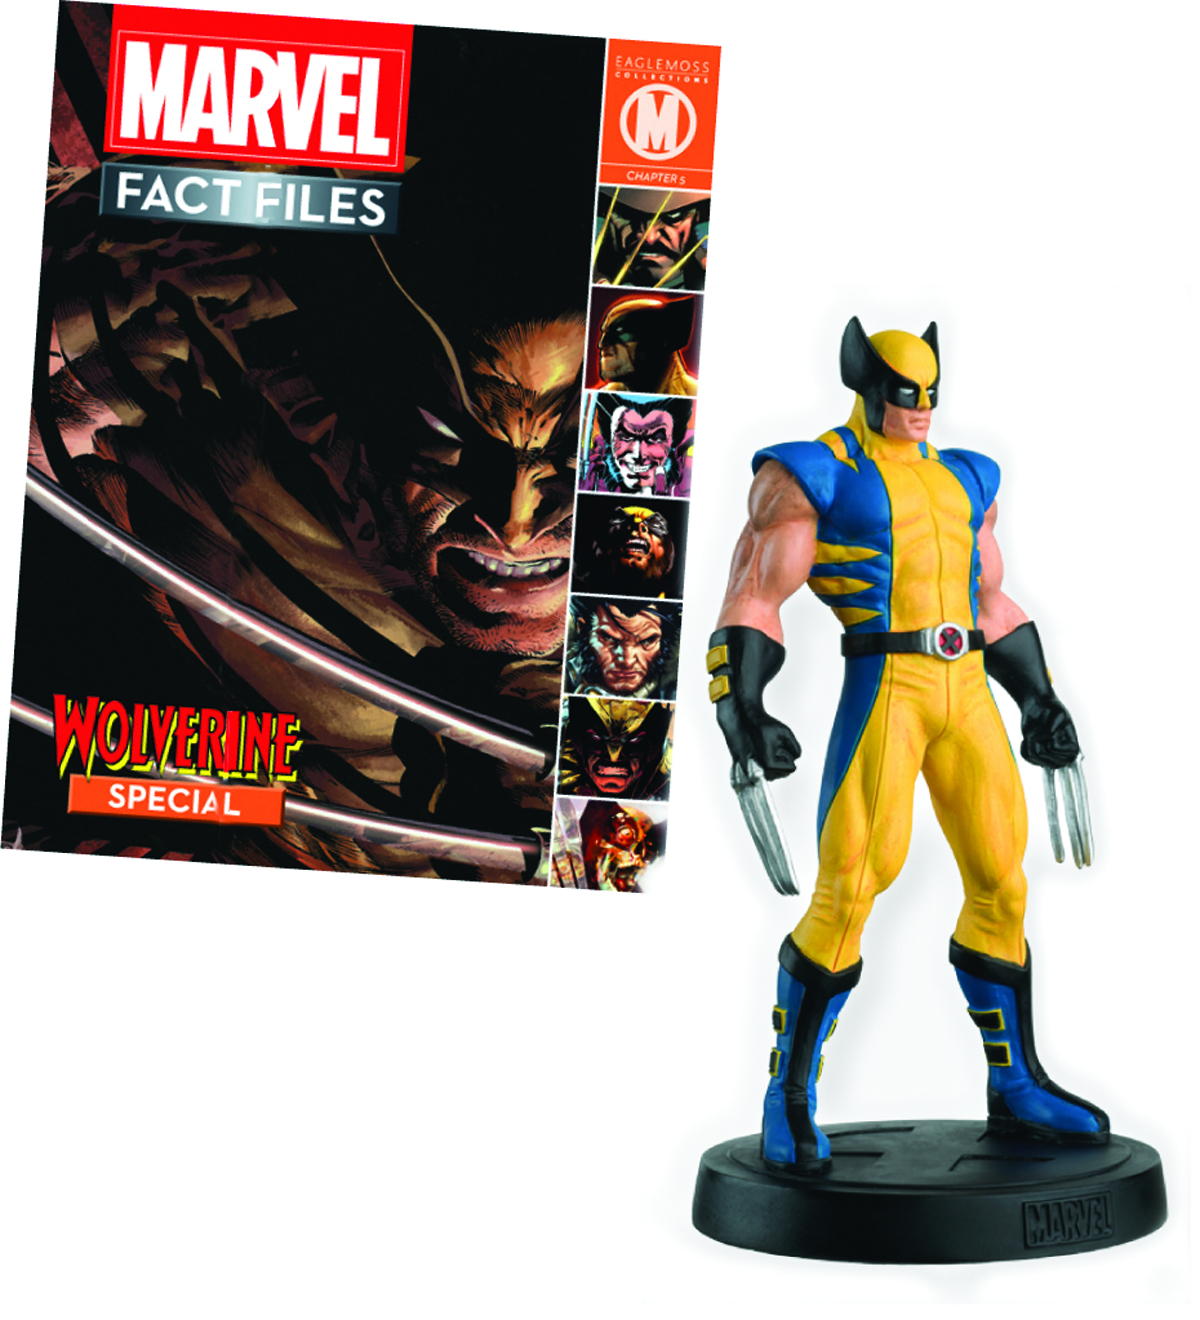 MARVEL FACT FILES SPECIAL #2 WOLVERINE